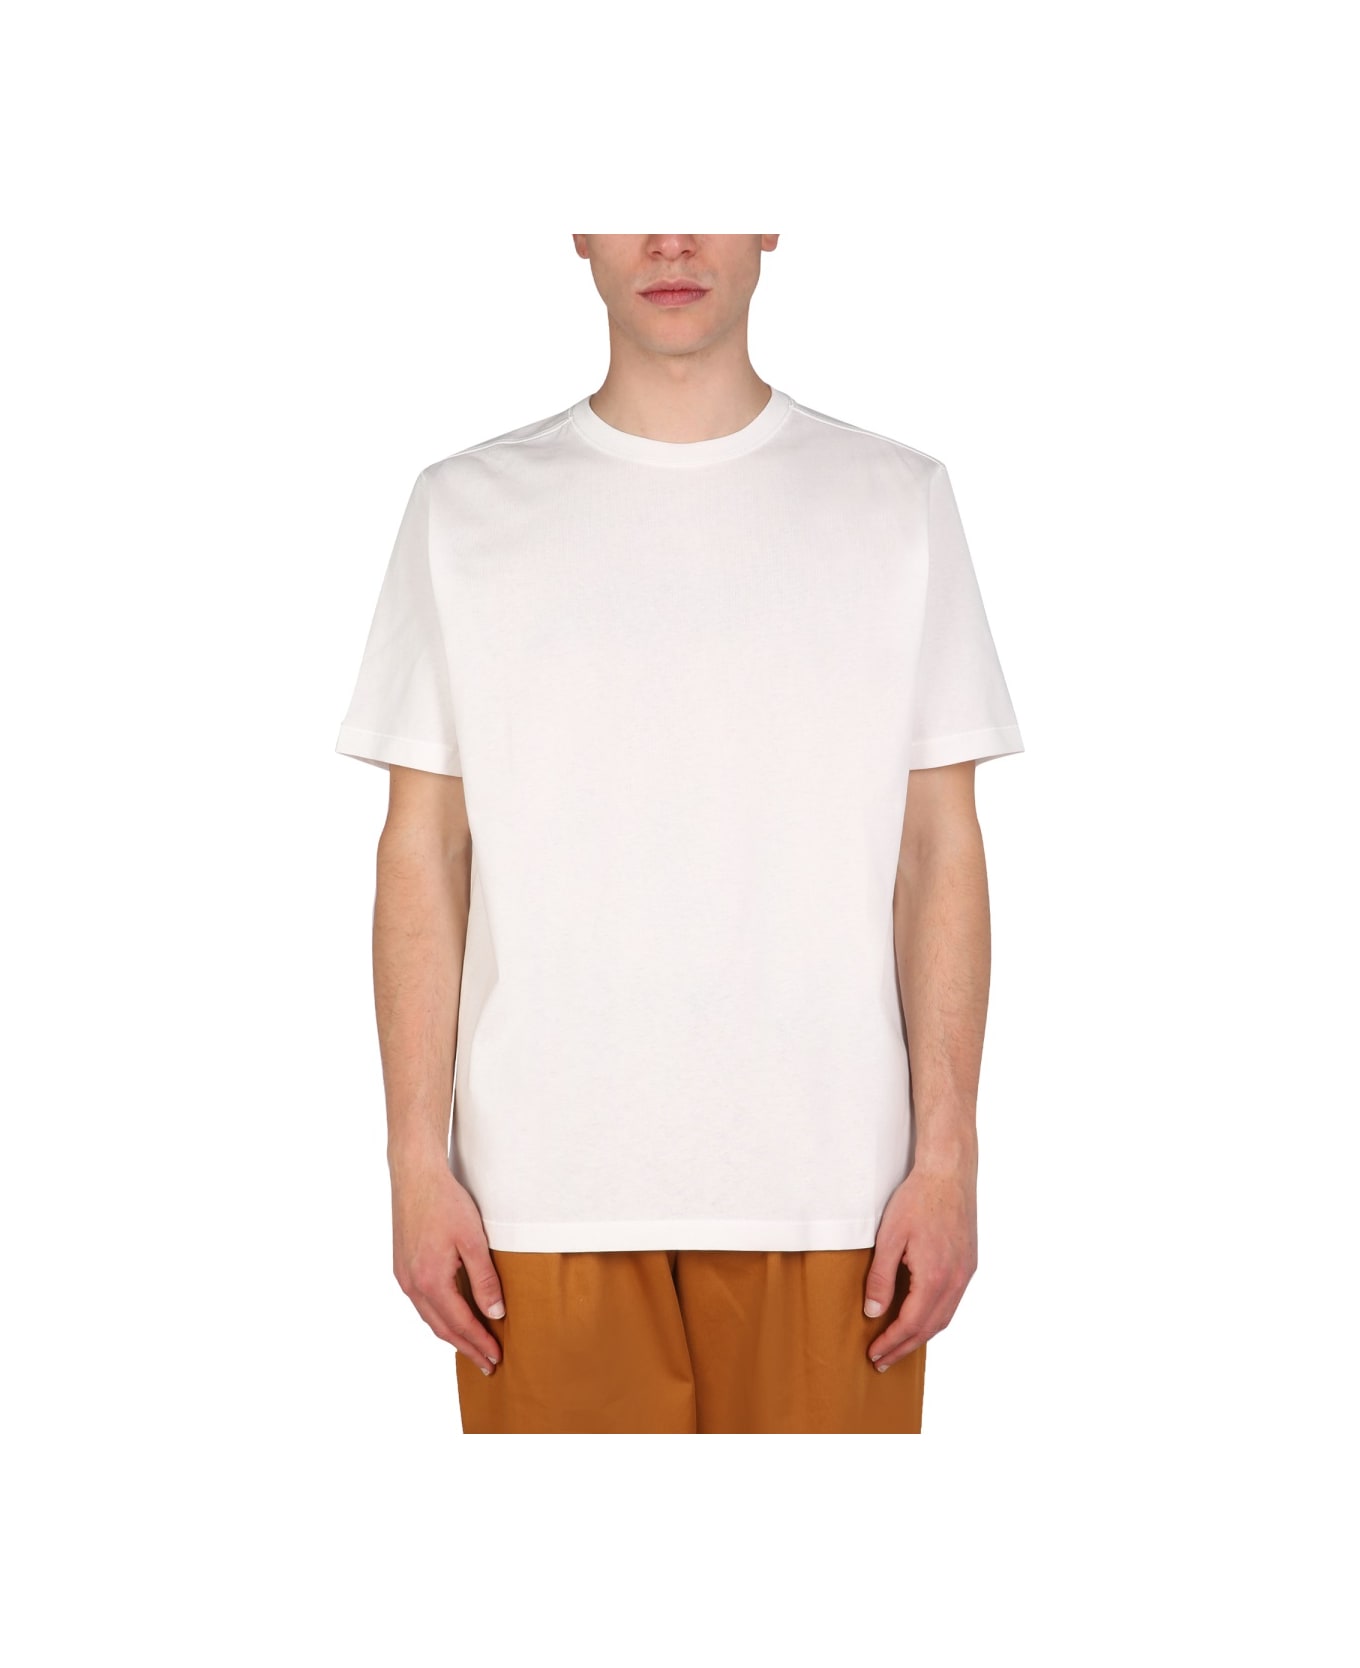 PS by Paul Smith Happy Happy T-shirt - WHITE